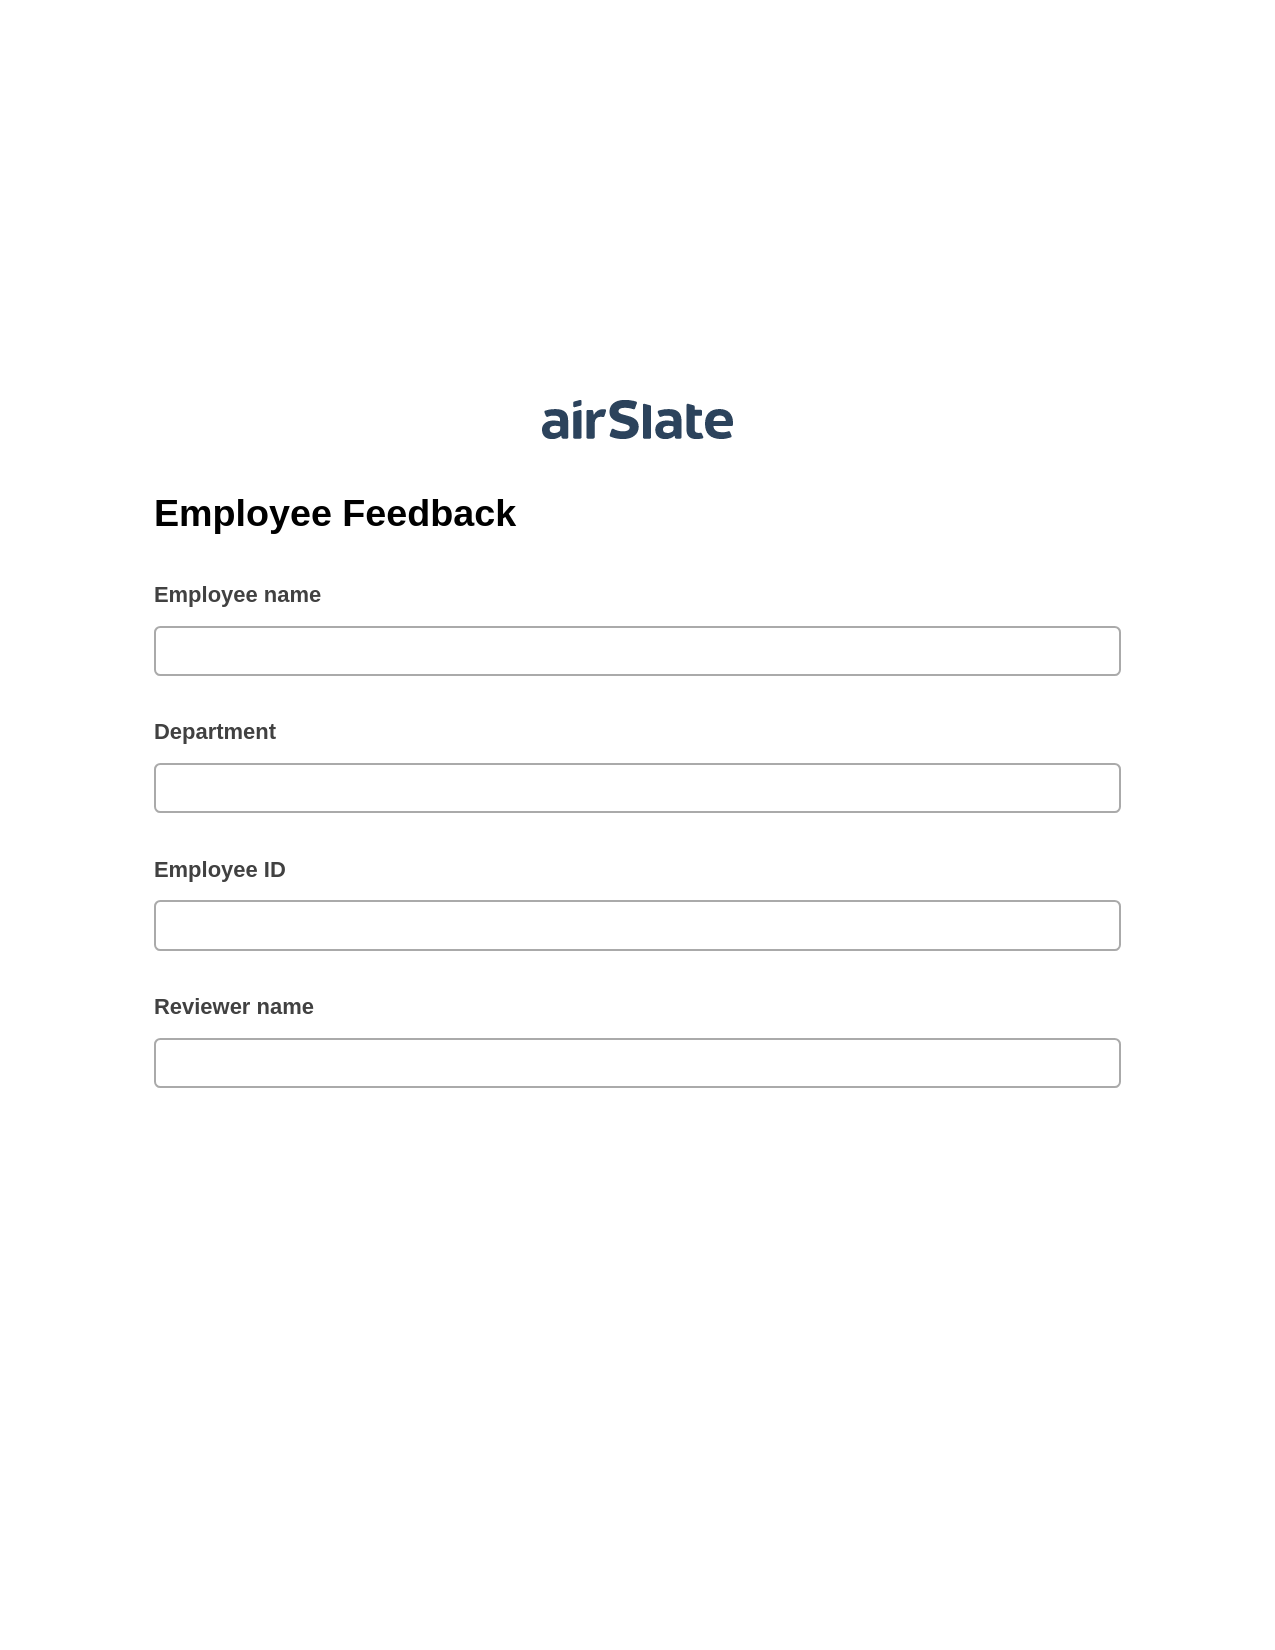 Employee Feedback Pre-fill from CSV File Bot, Pre-fill with Custom Data Bot, Export to Formstack Documents Bot